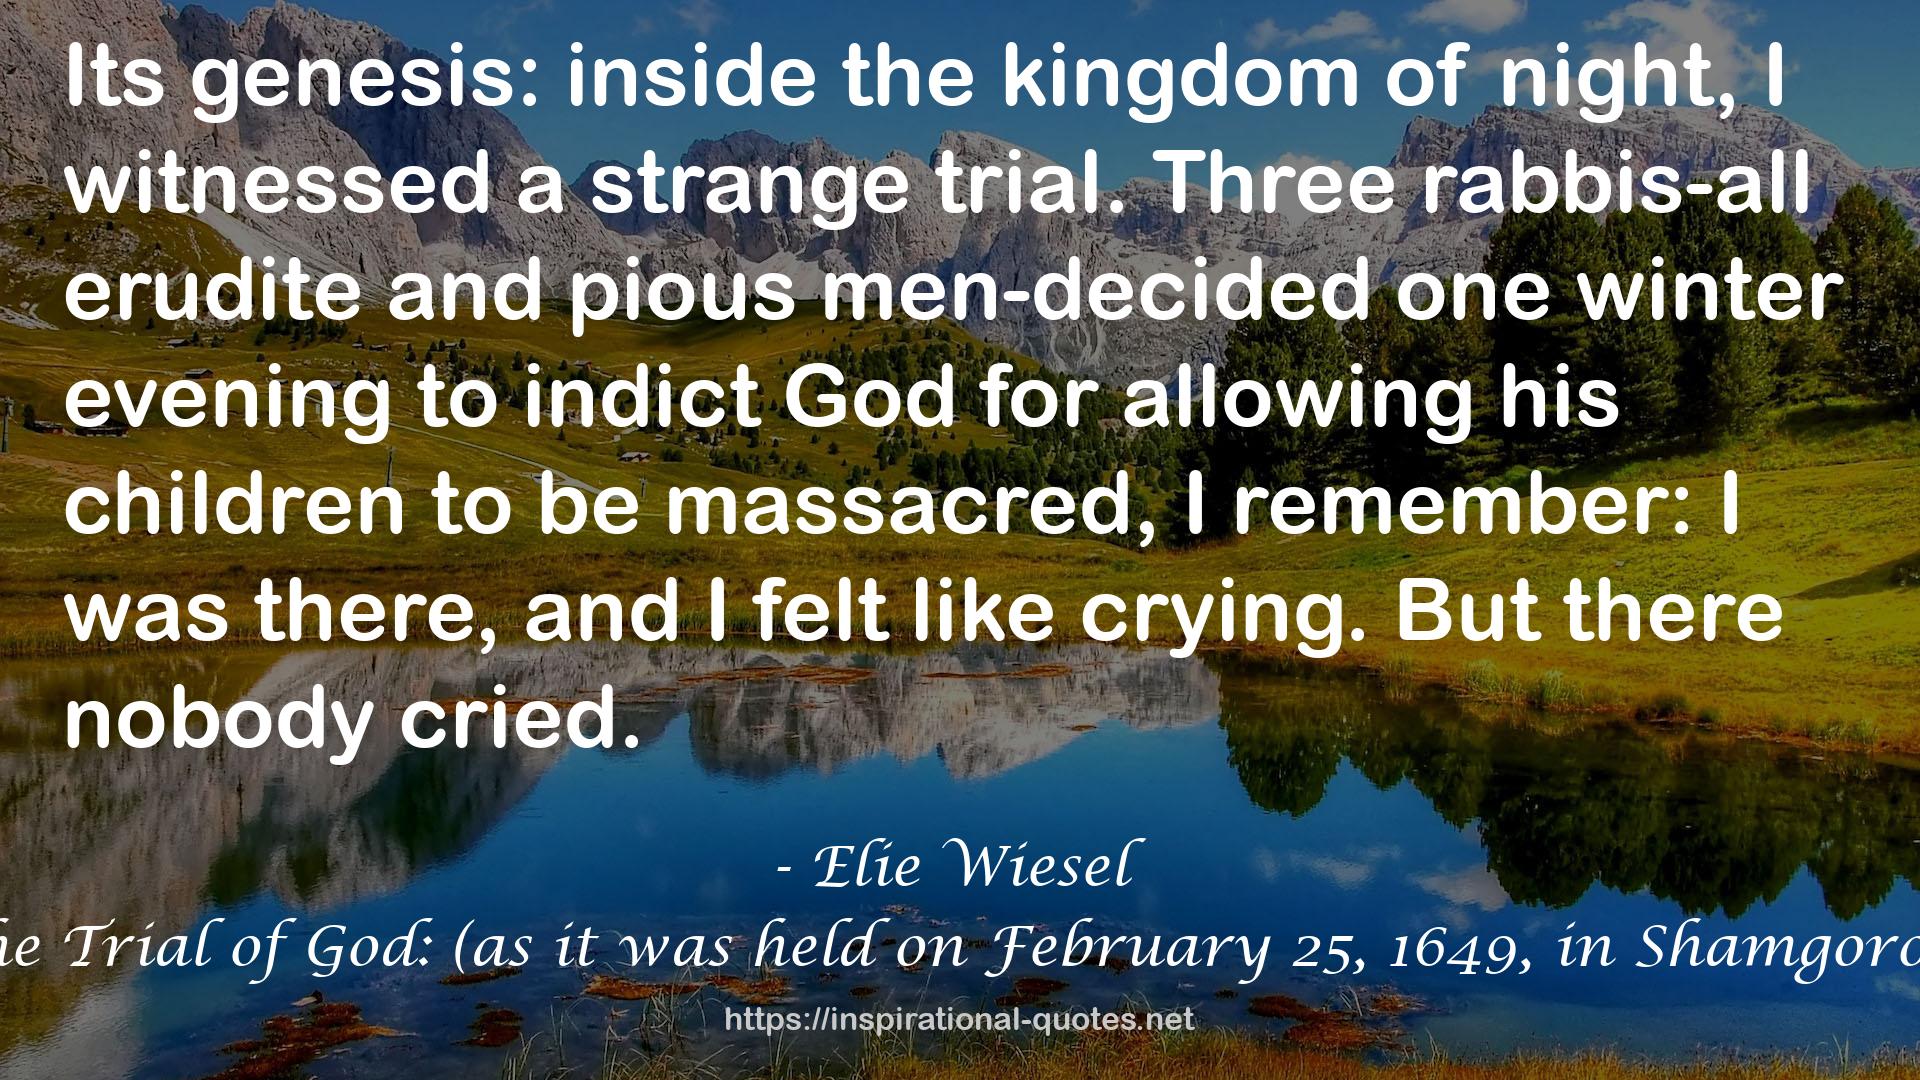 The Trial of God: (as it was held on February 25, 1649, in Shamgorod) QUOTES